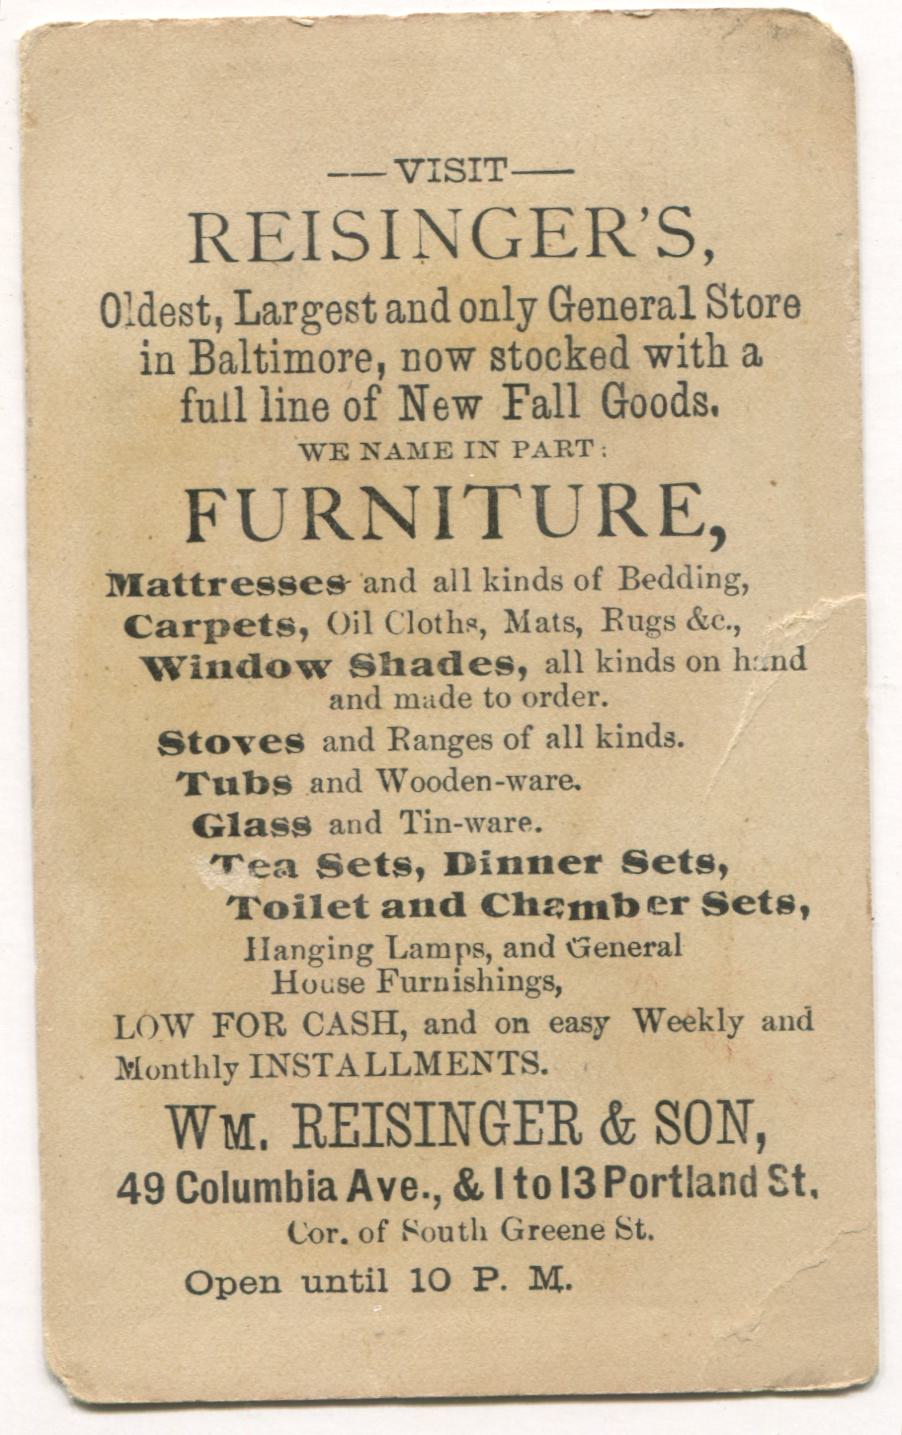 Wm. Resinger & Son General Store, Baltimore, MD Antique Lithographed Trade Card